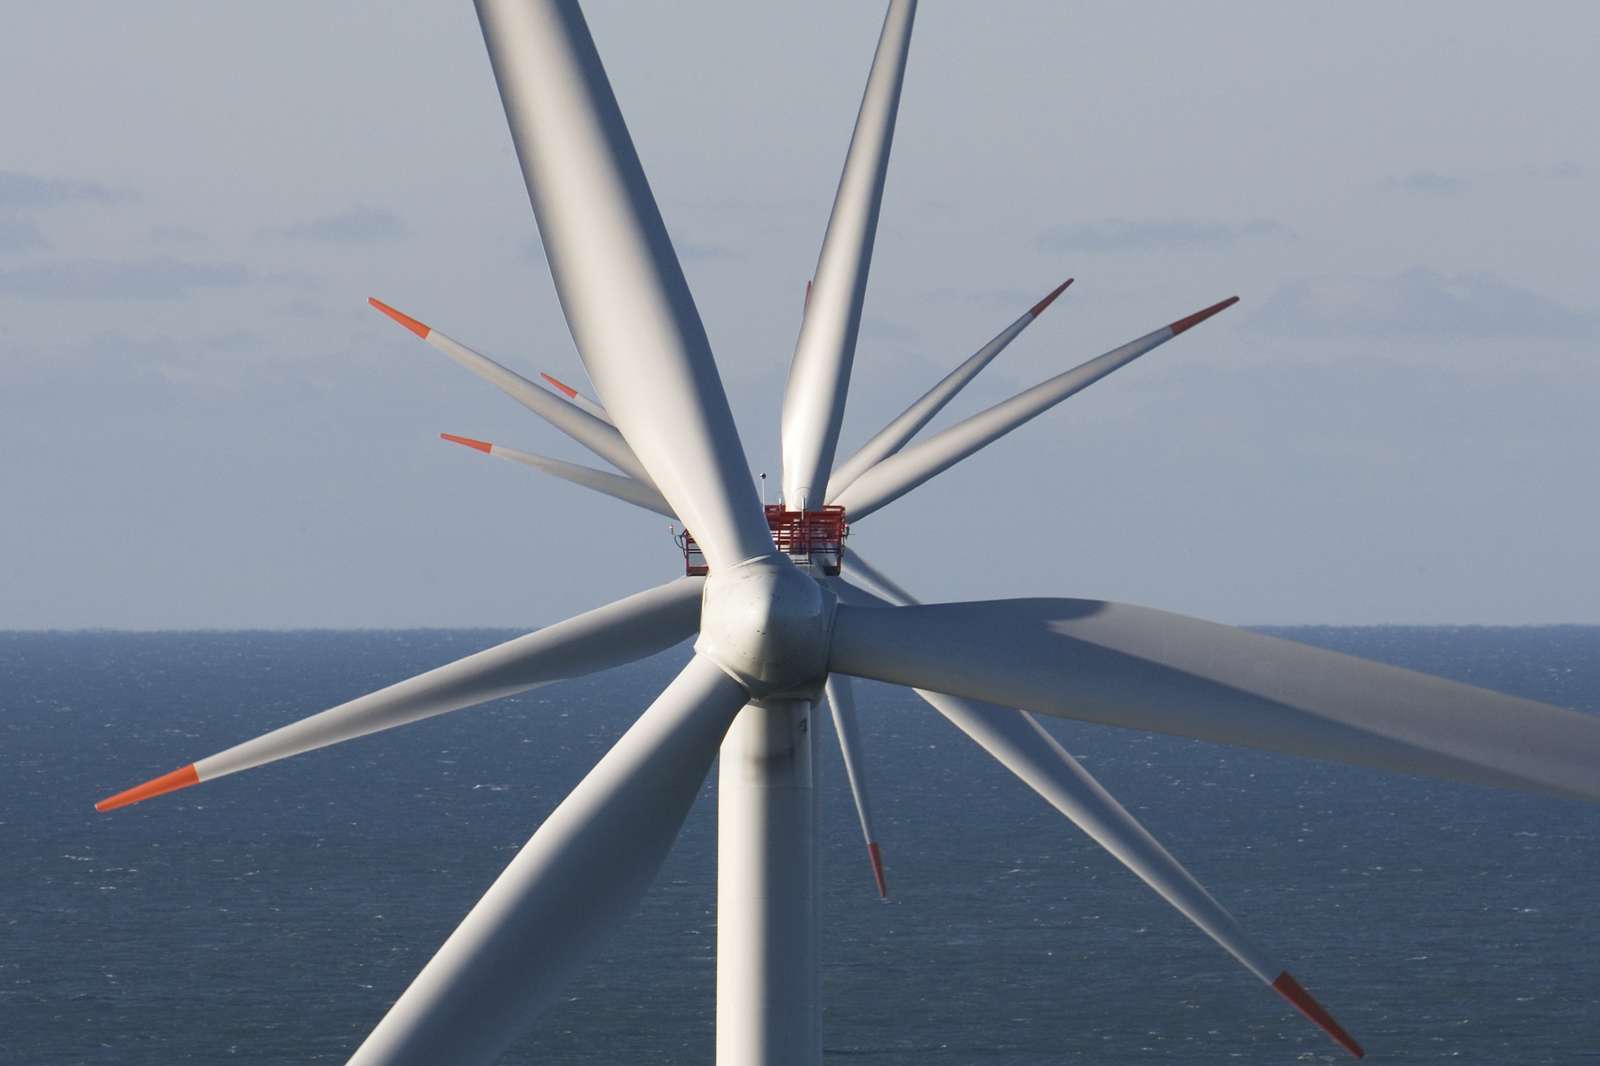 Unsere Offshore-Windparks